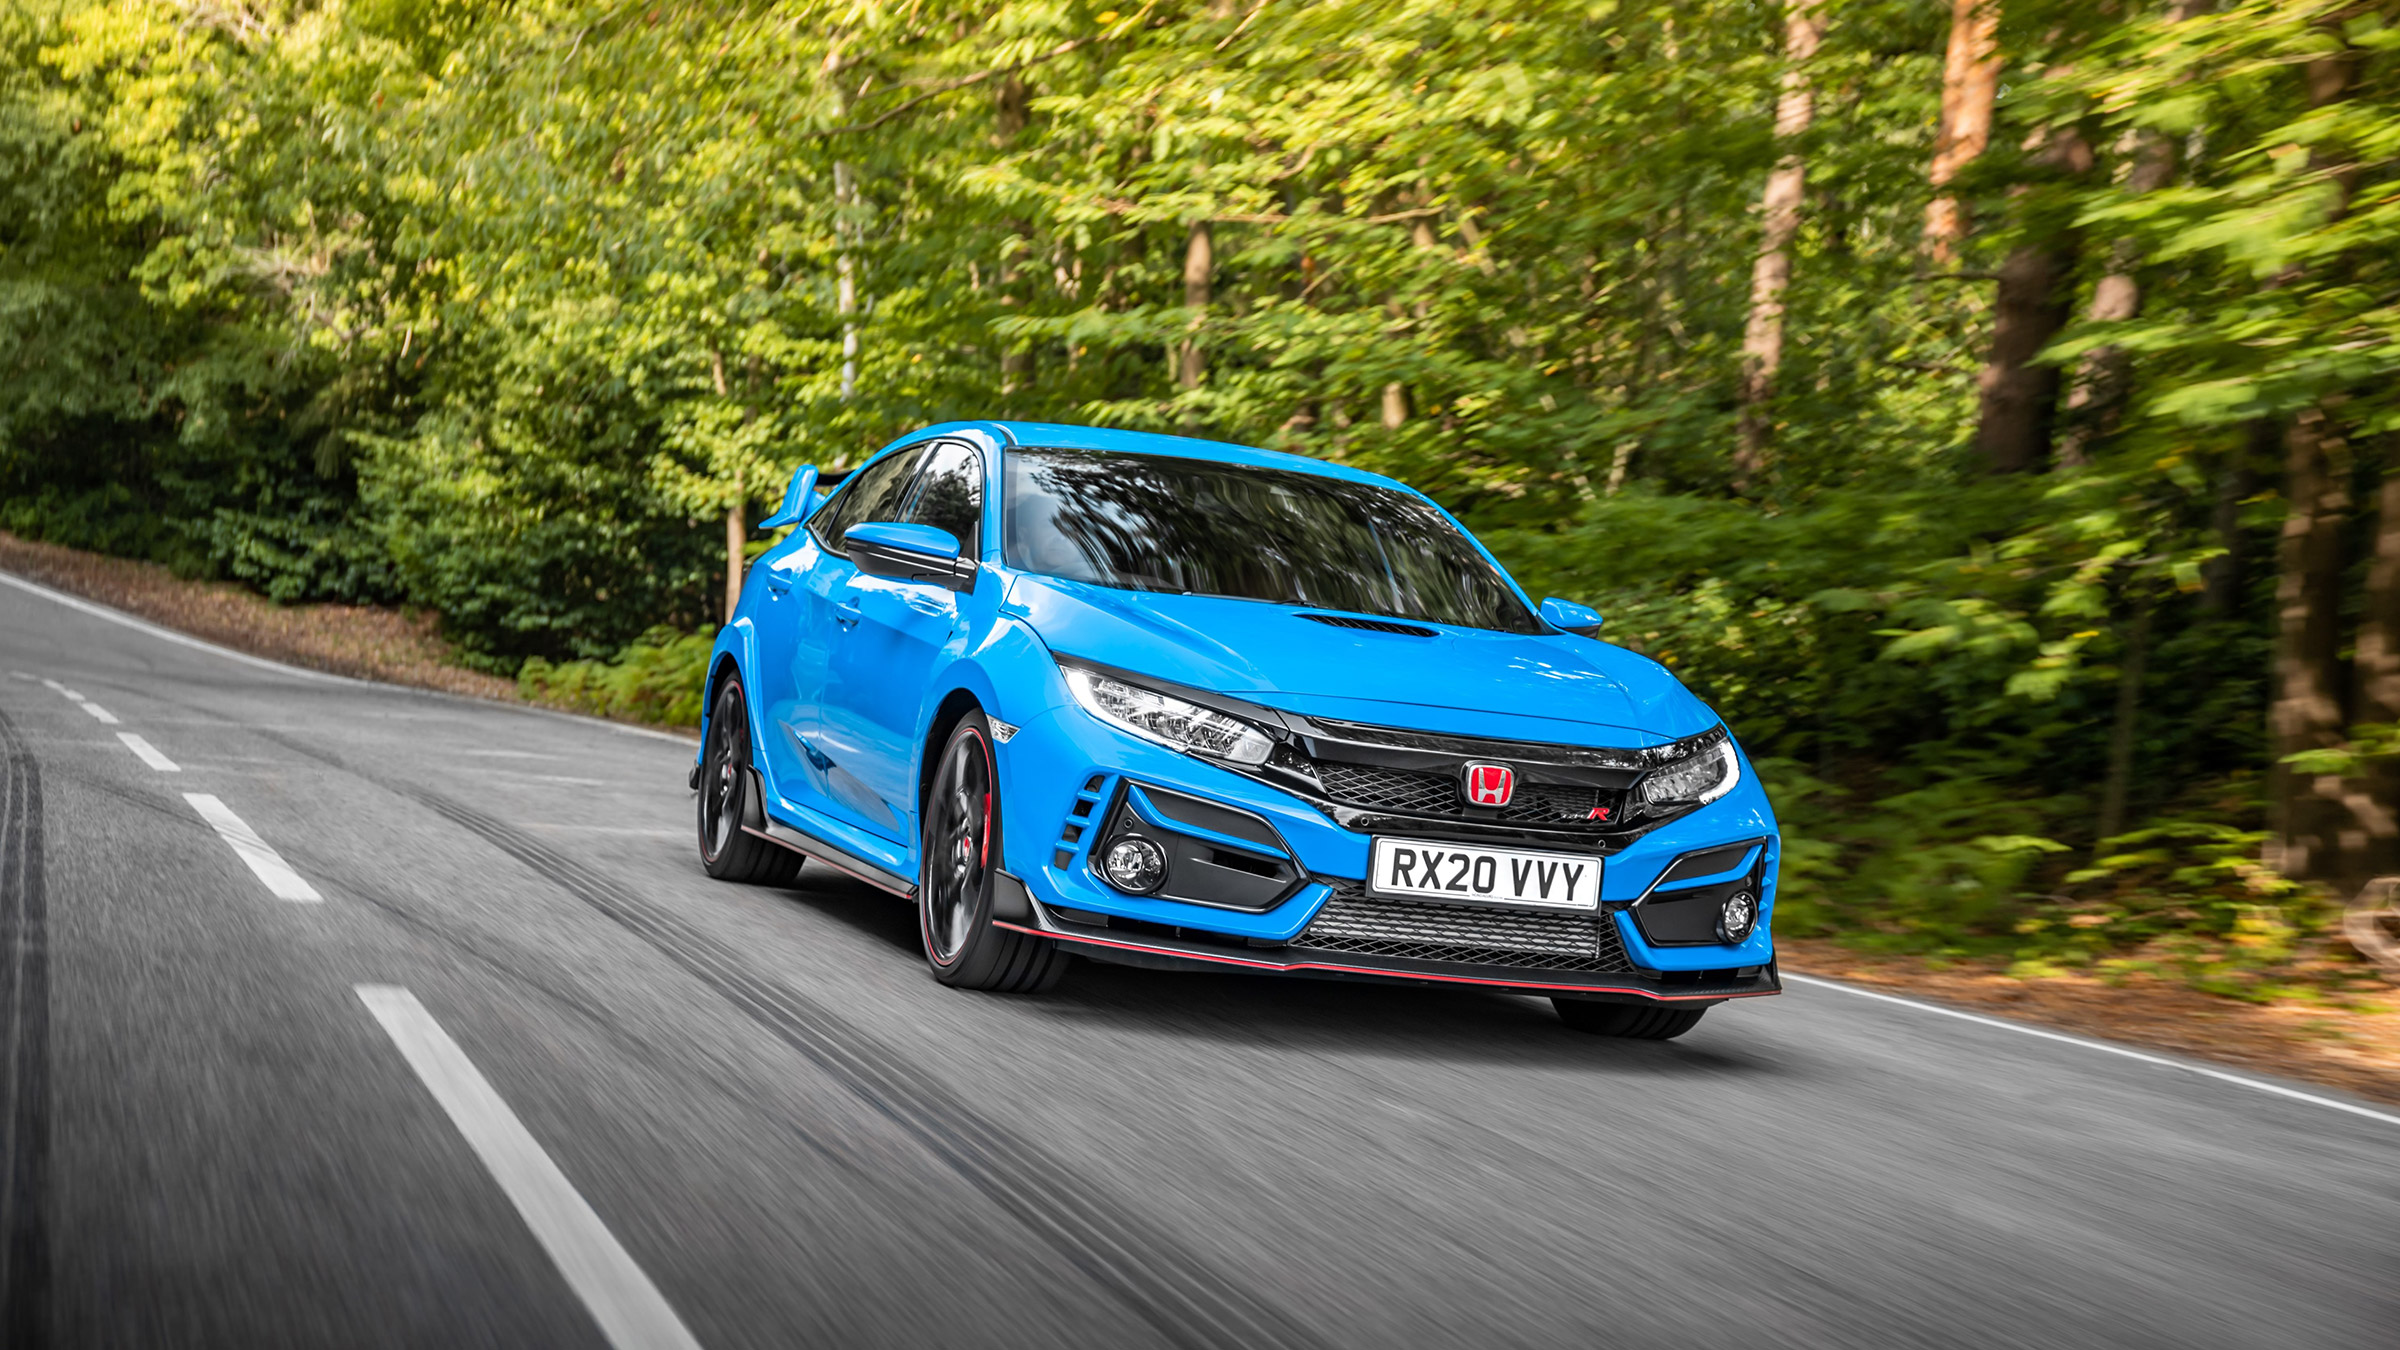 Honda Civic Type R GT 2020 review still king of the hot